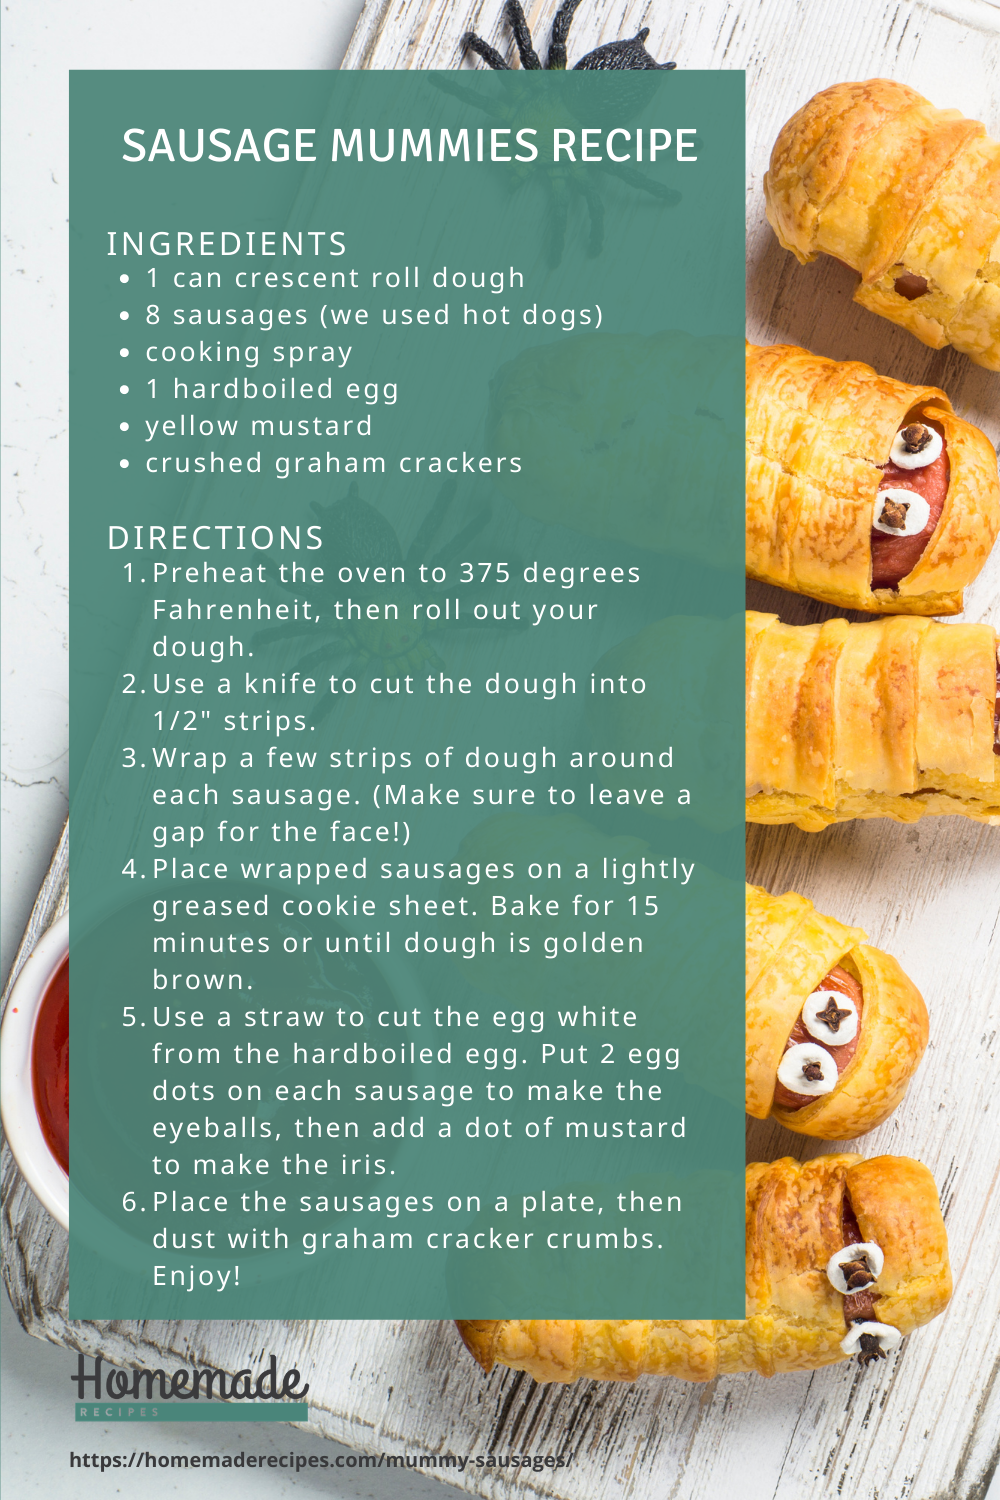 recipe card | These Sausage Mummies Are A Spooktacular Halloween Snack